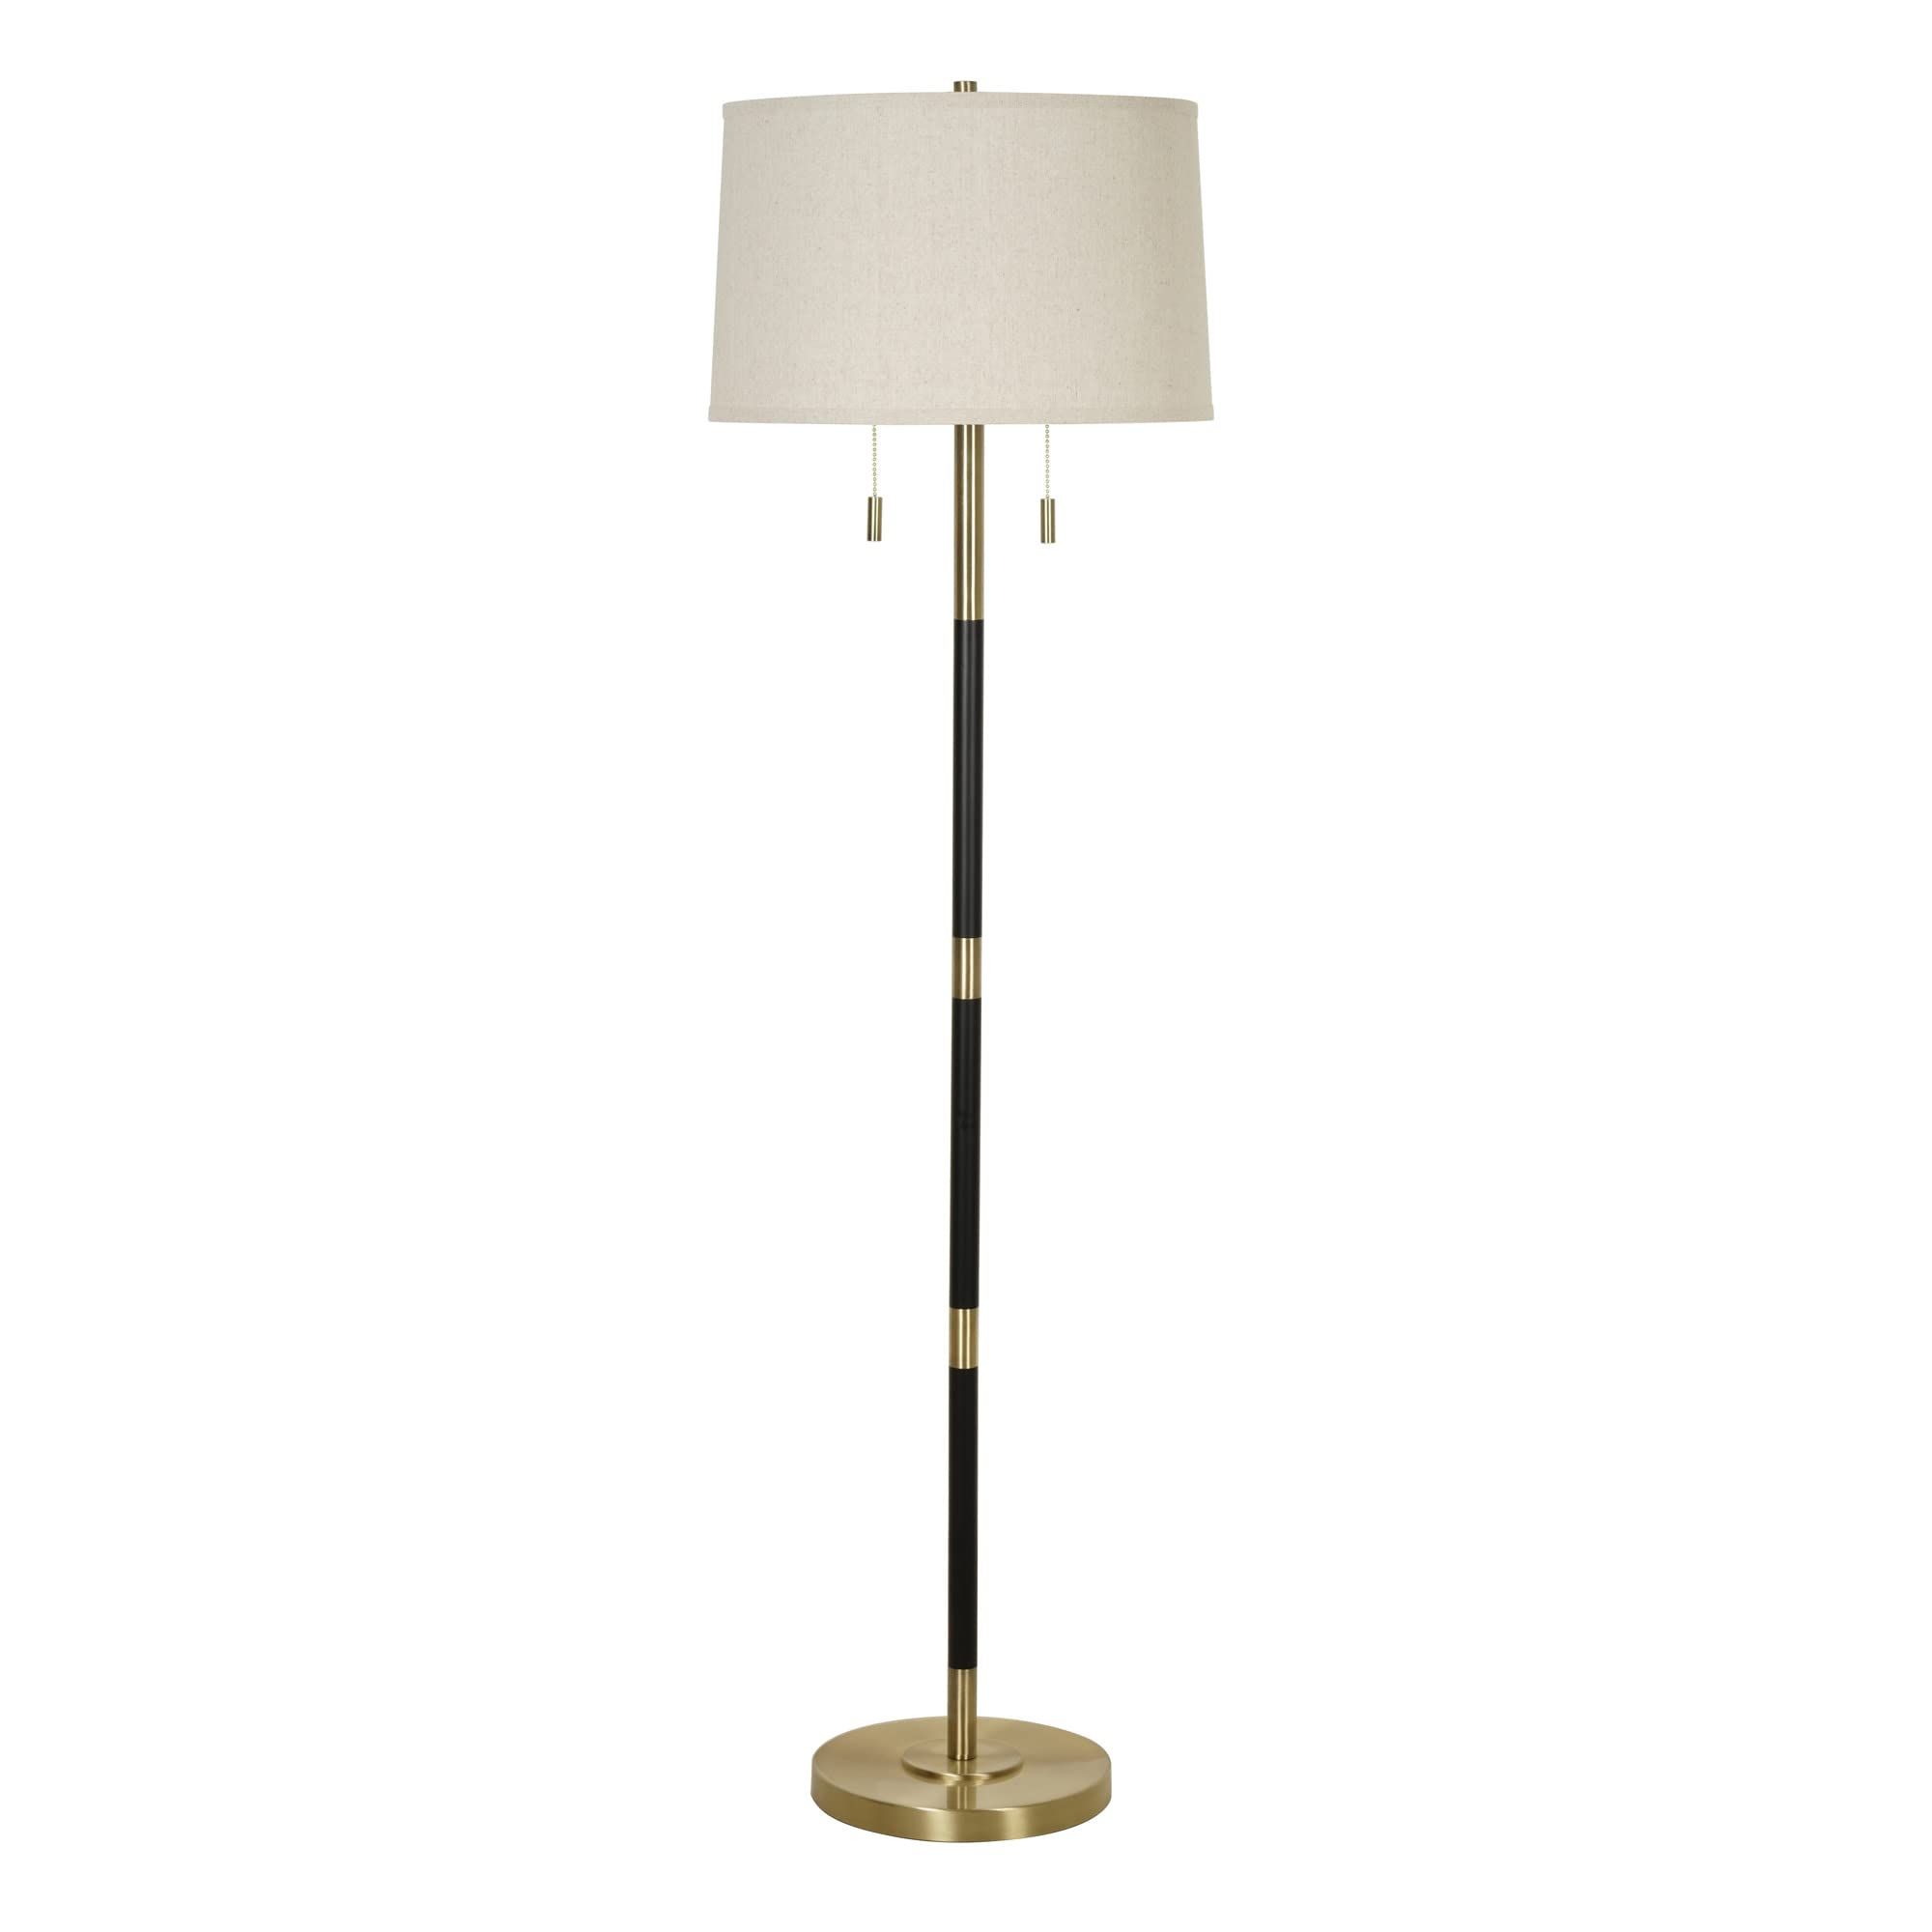 Most Up To Date Catalina 23209 000 Transitional 2 Light Dual Pull Chain Floor Lamp,  (View 5 of 10)